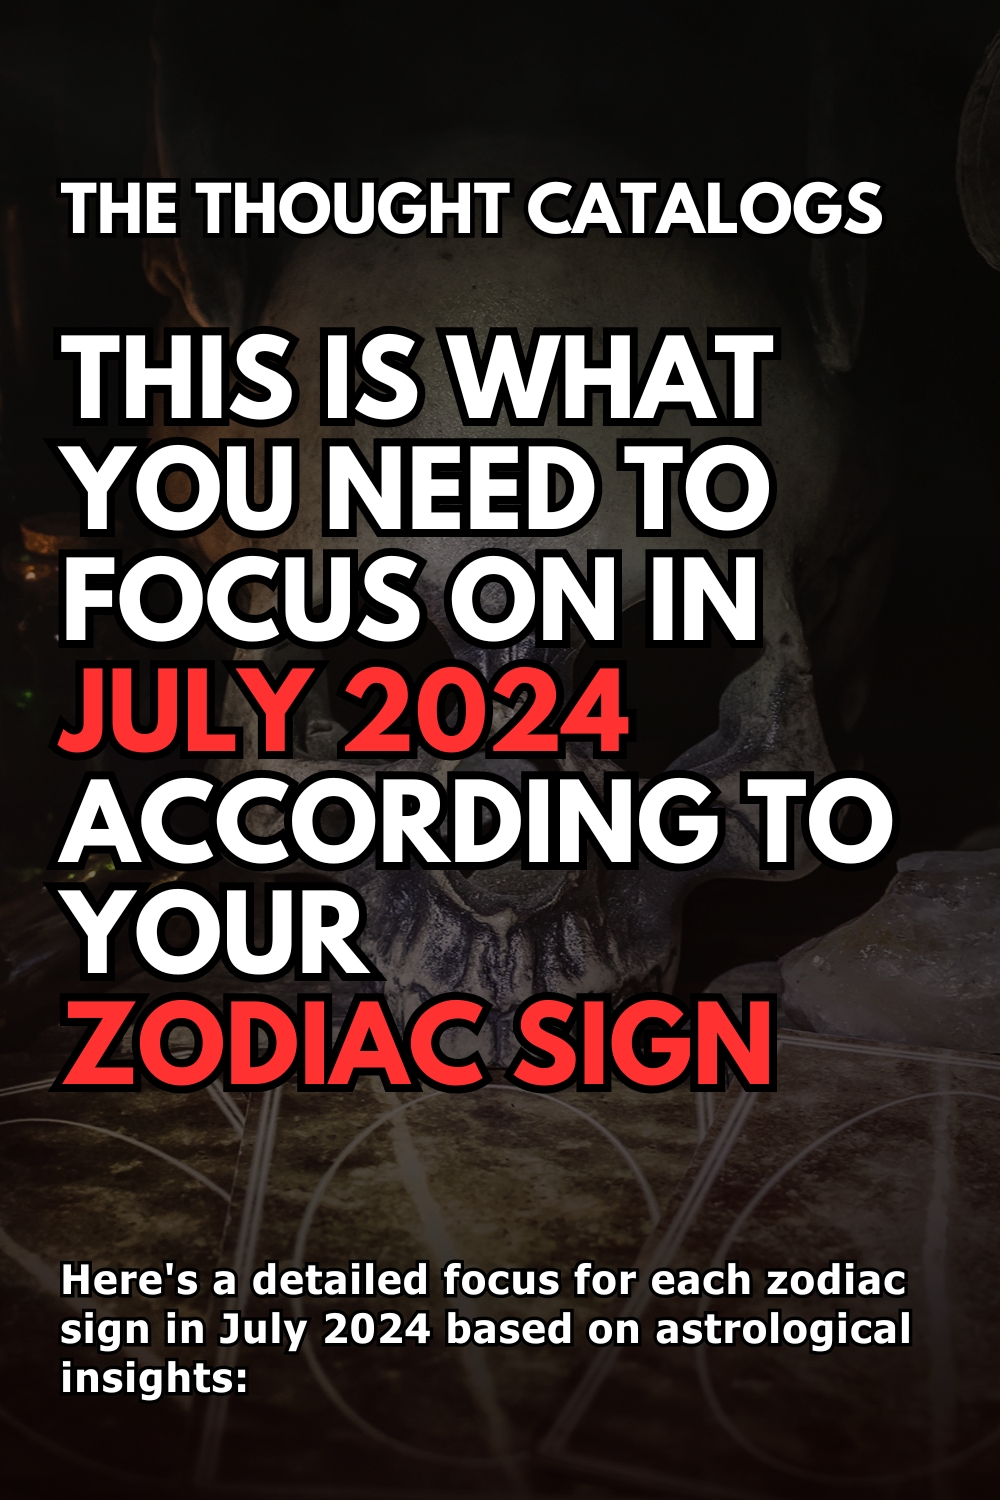 This Is What You Need To Focus On In July 2024, According To Your Zodiac Sign